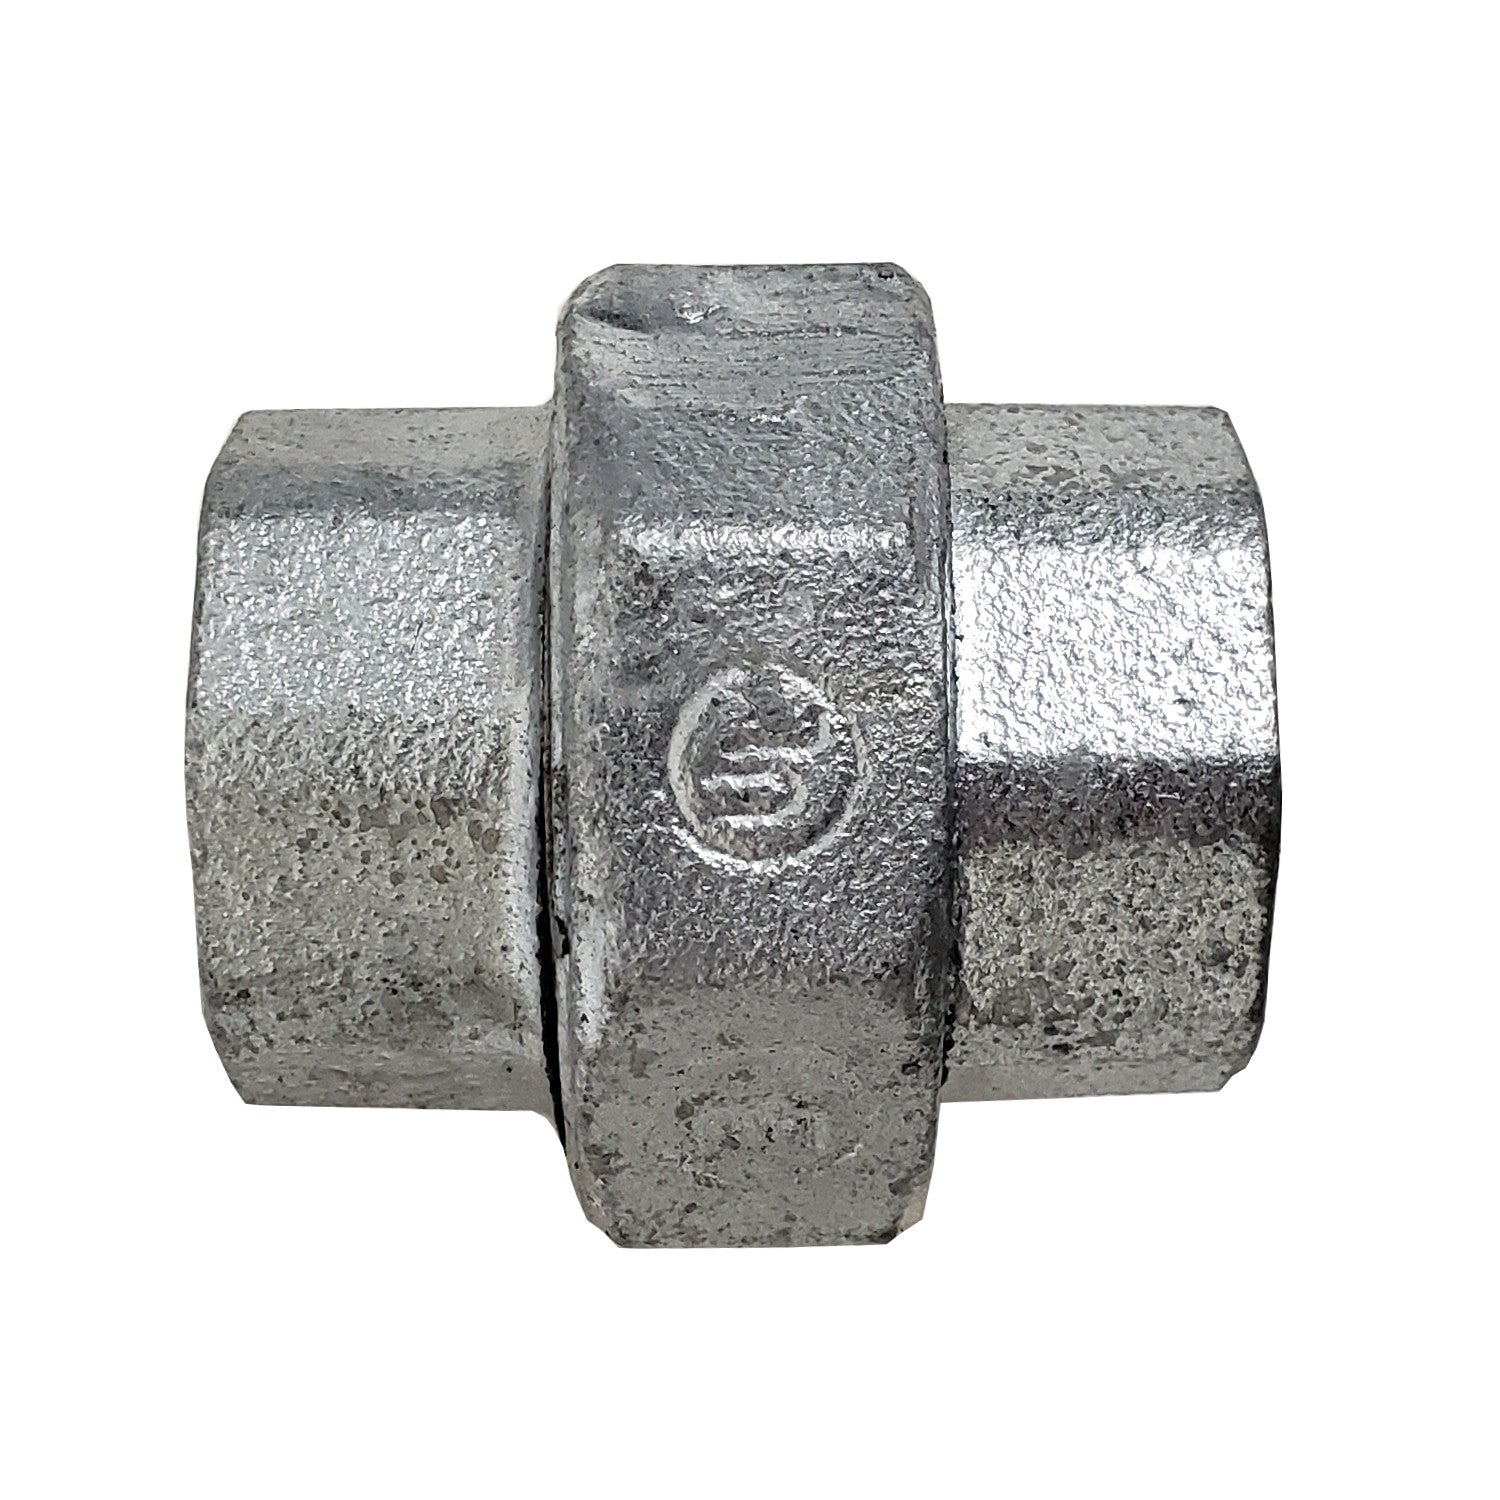 IQ-Parts Two-part clamping ring - 2B - W1 - galvanized